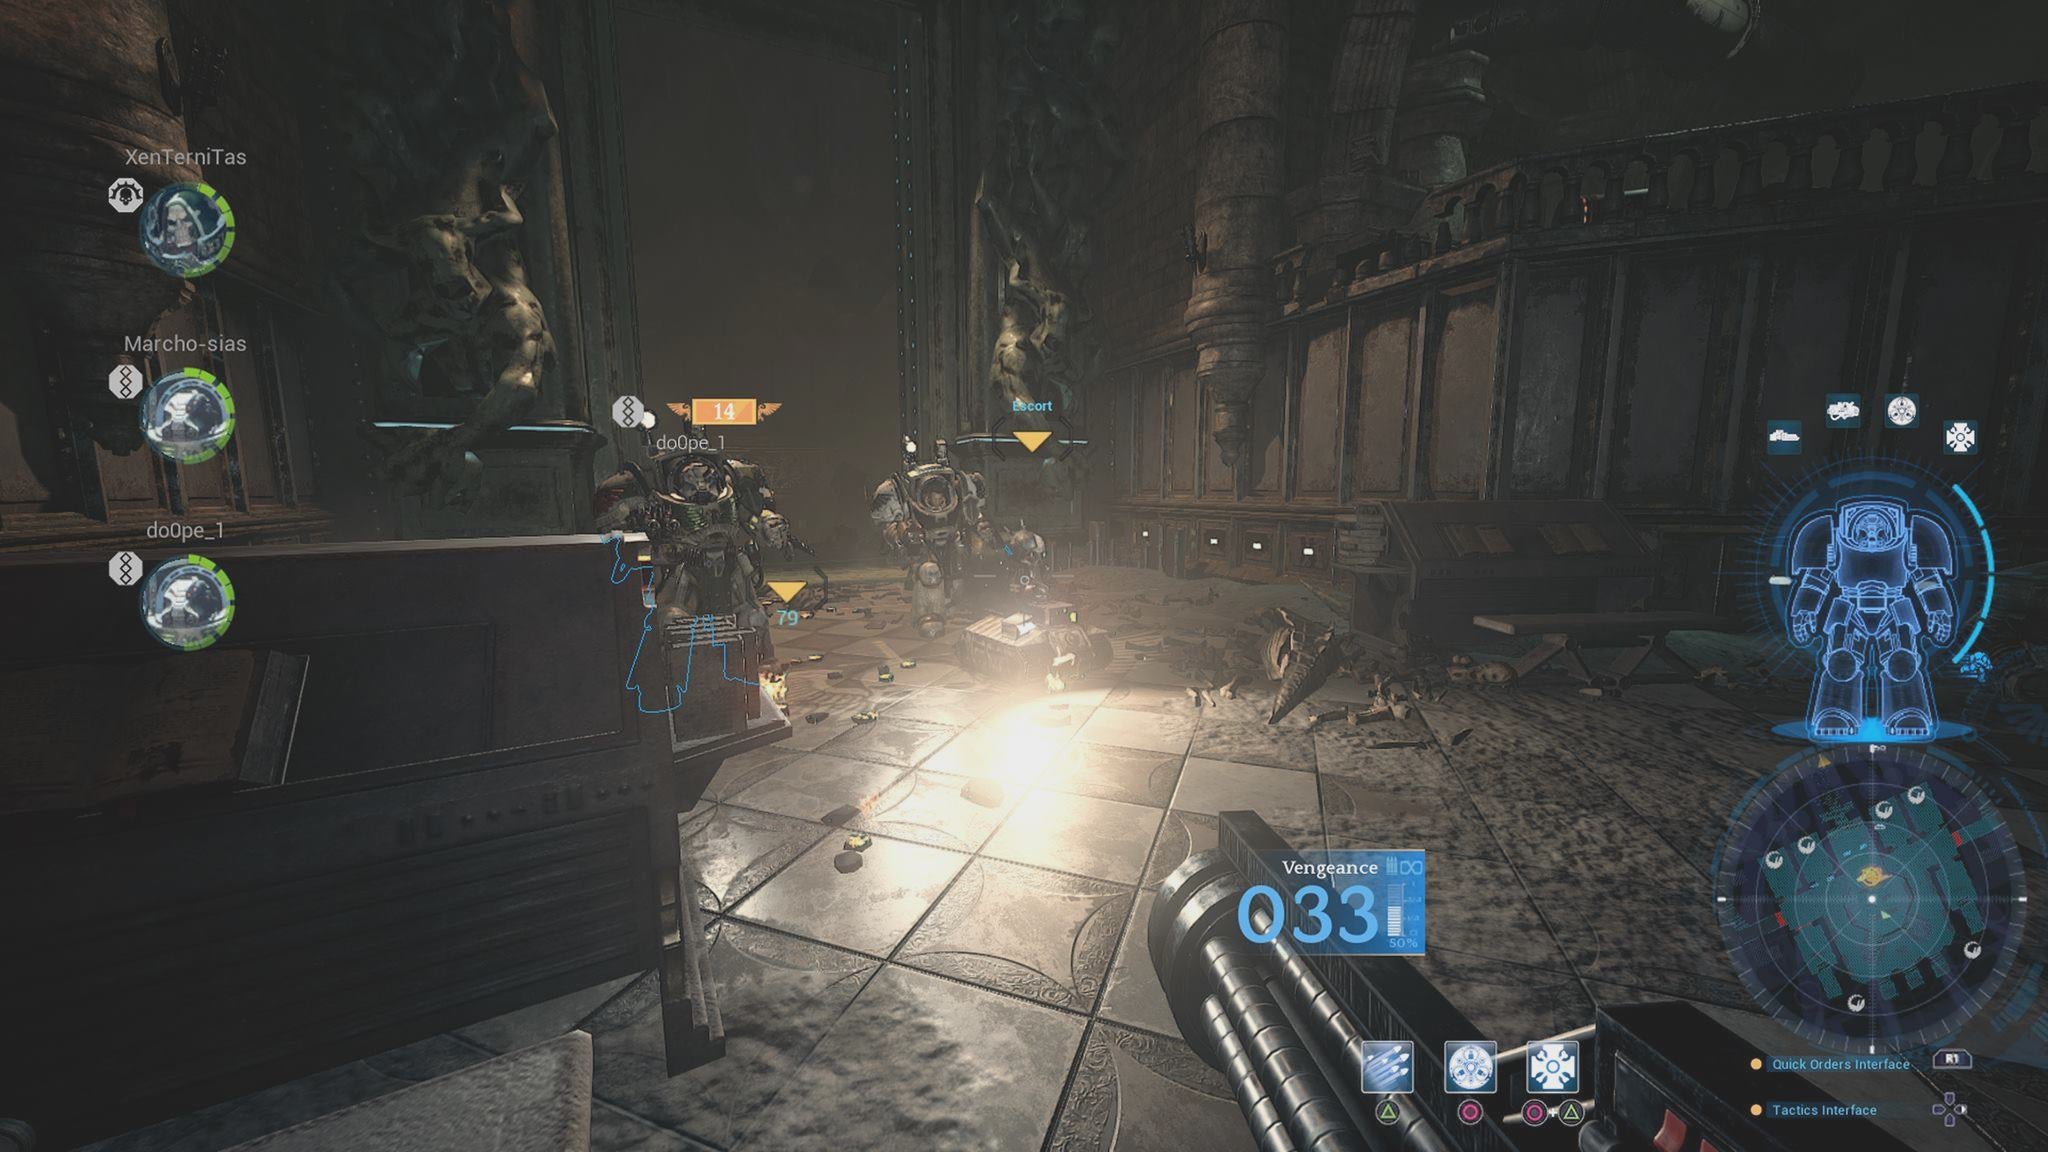 Screenshot of Space Hulk: Deathwing game showing player interface and characters.